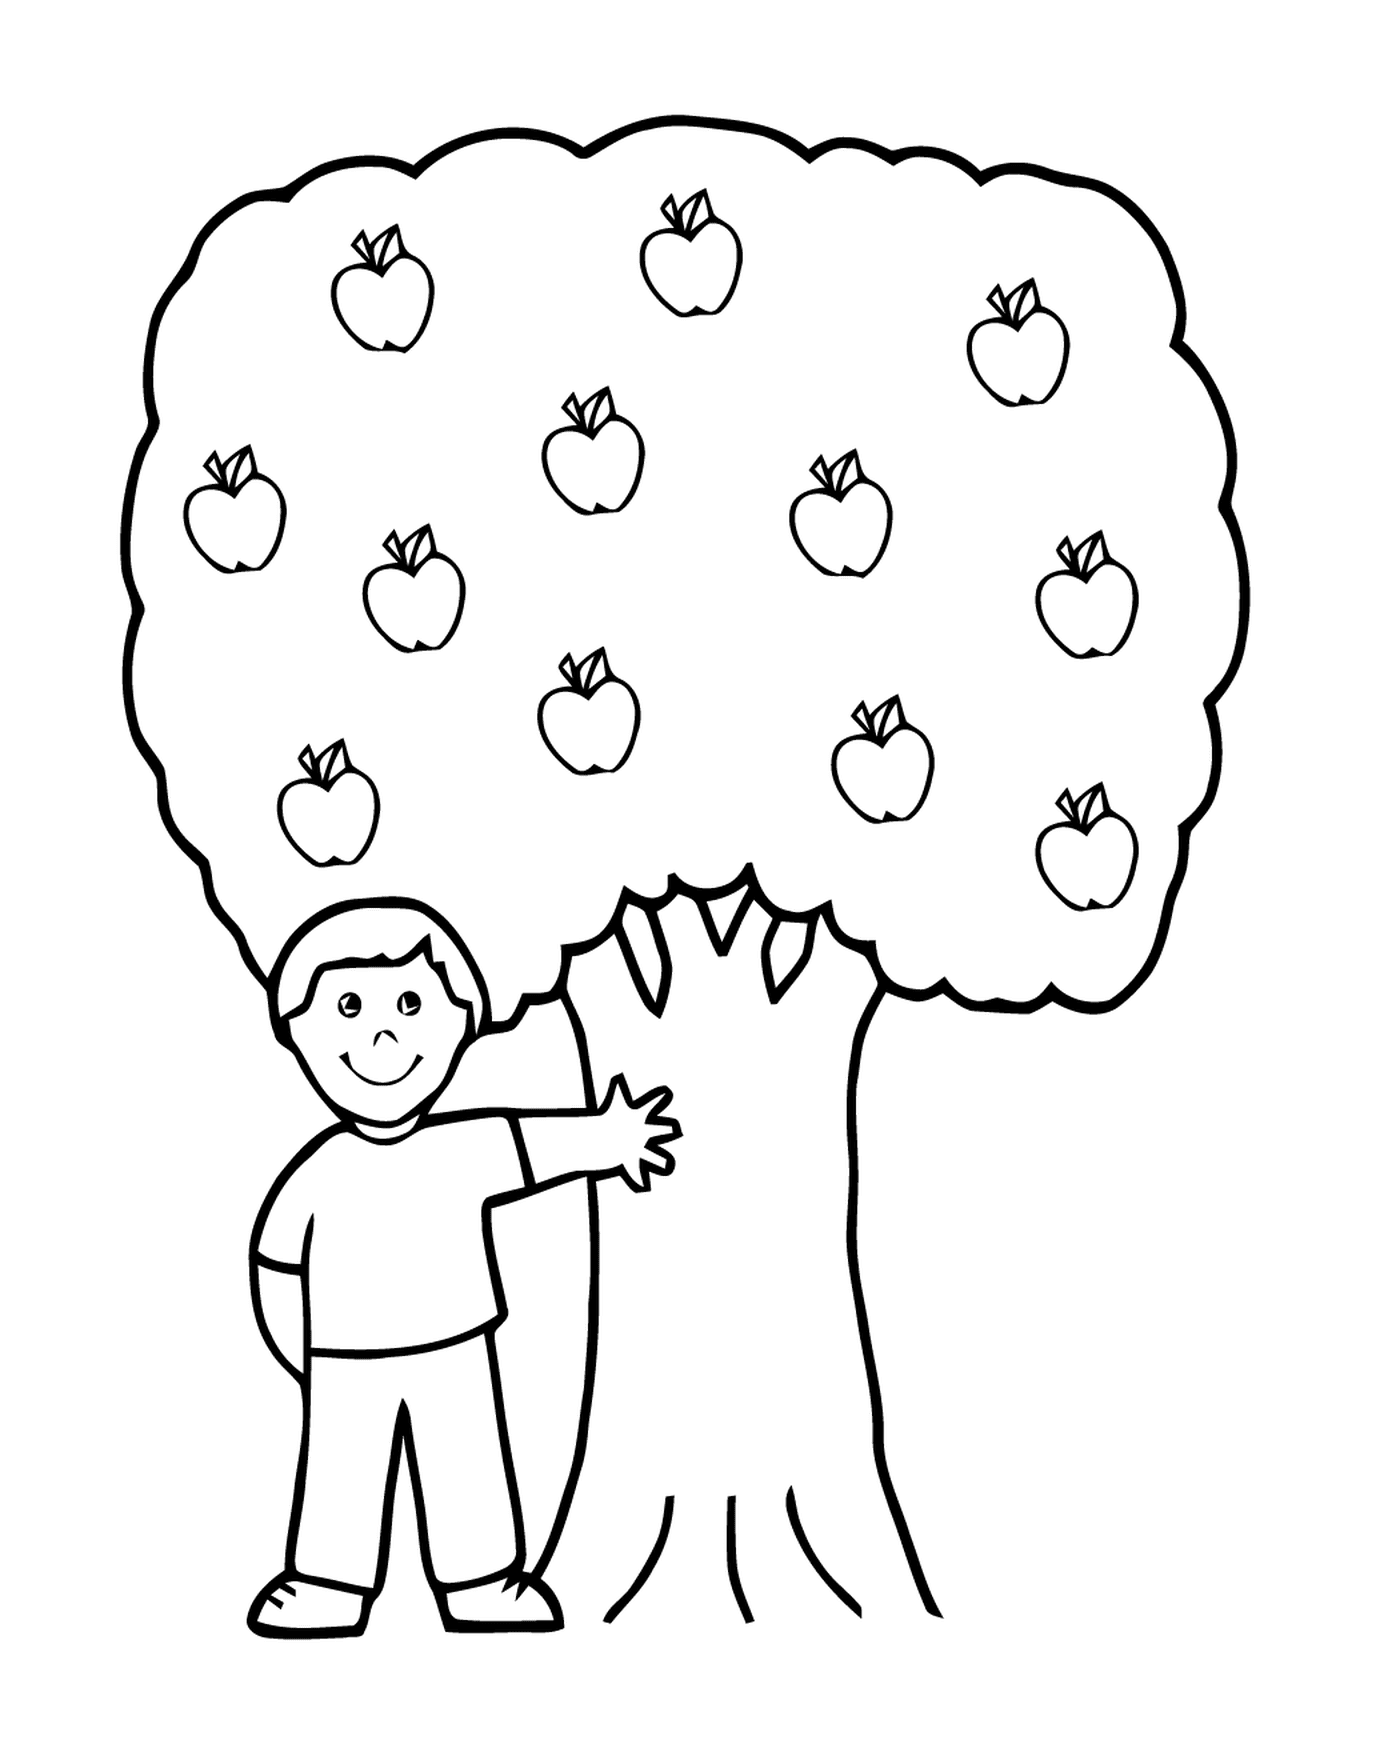  A boy standing next to a tree 